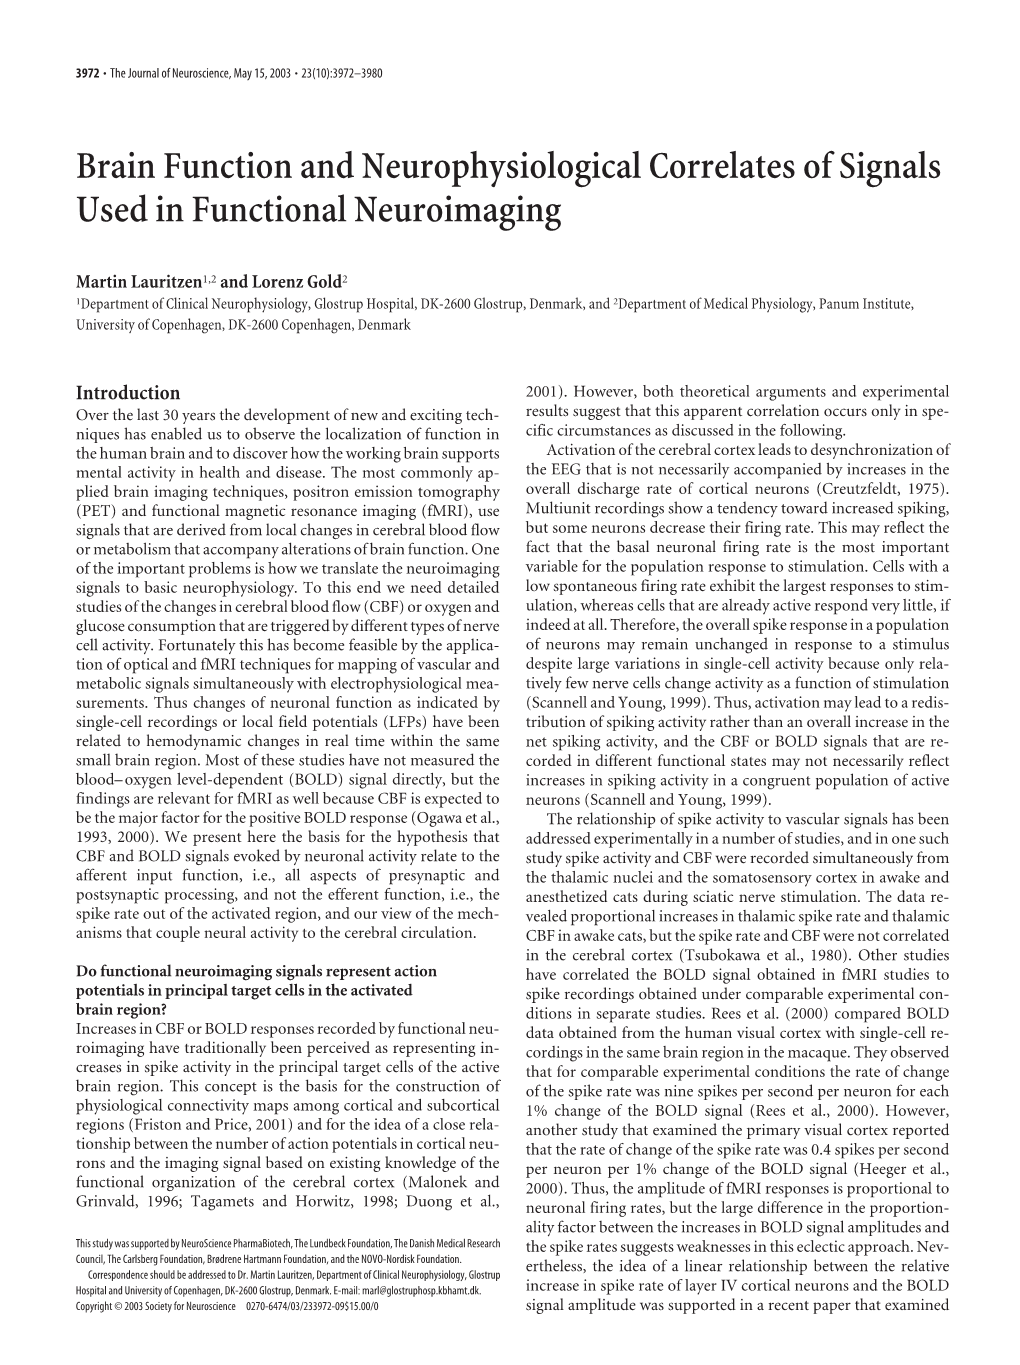 Brain Function and Neurophysiological Correlates of Signals Used in Functional Neuroimaging